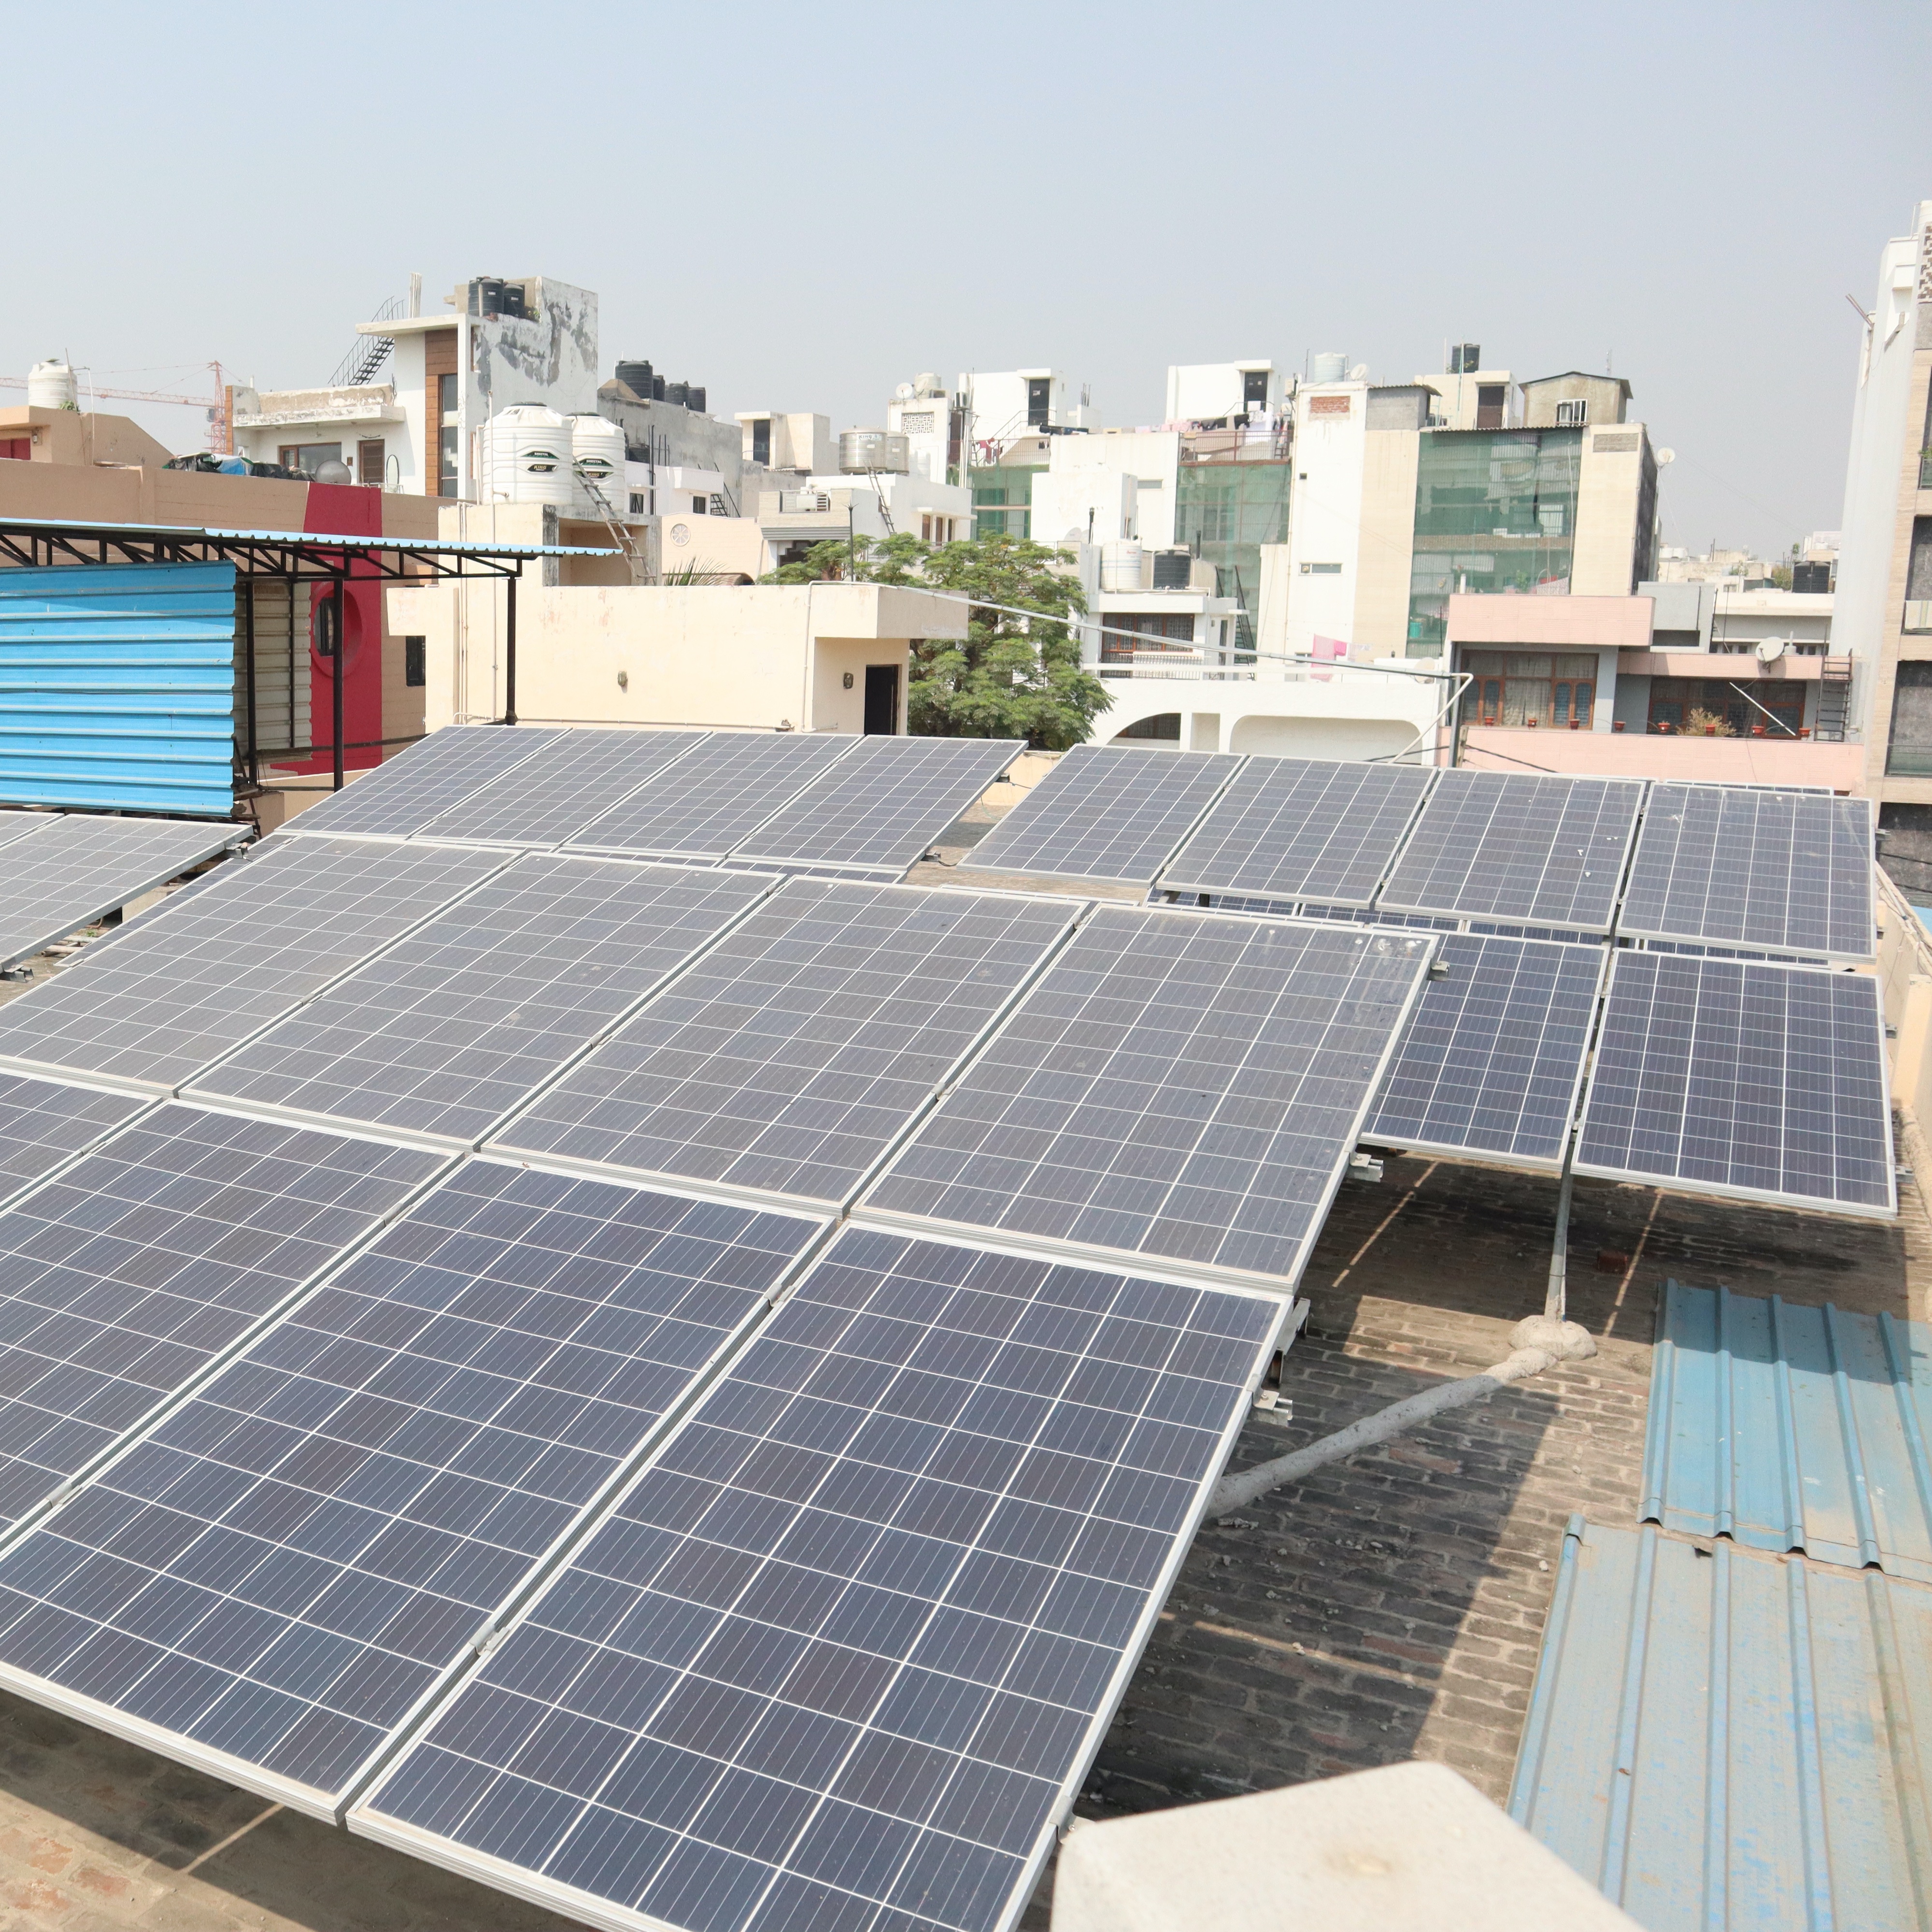 BSES discoms launch projects to promote rooftop solar plants in Safdarjung, Karkardooma